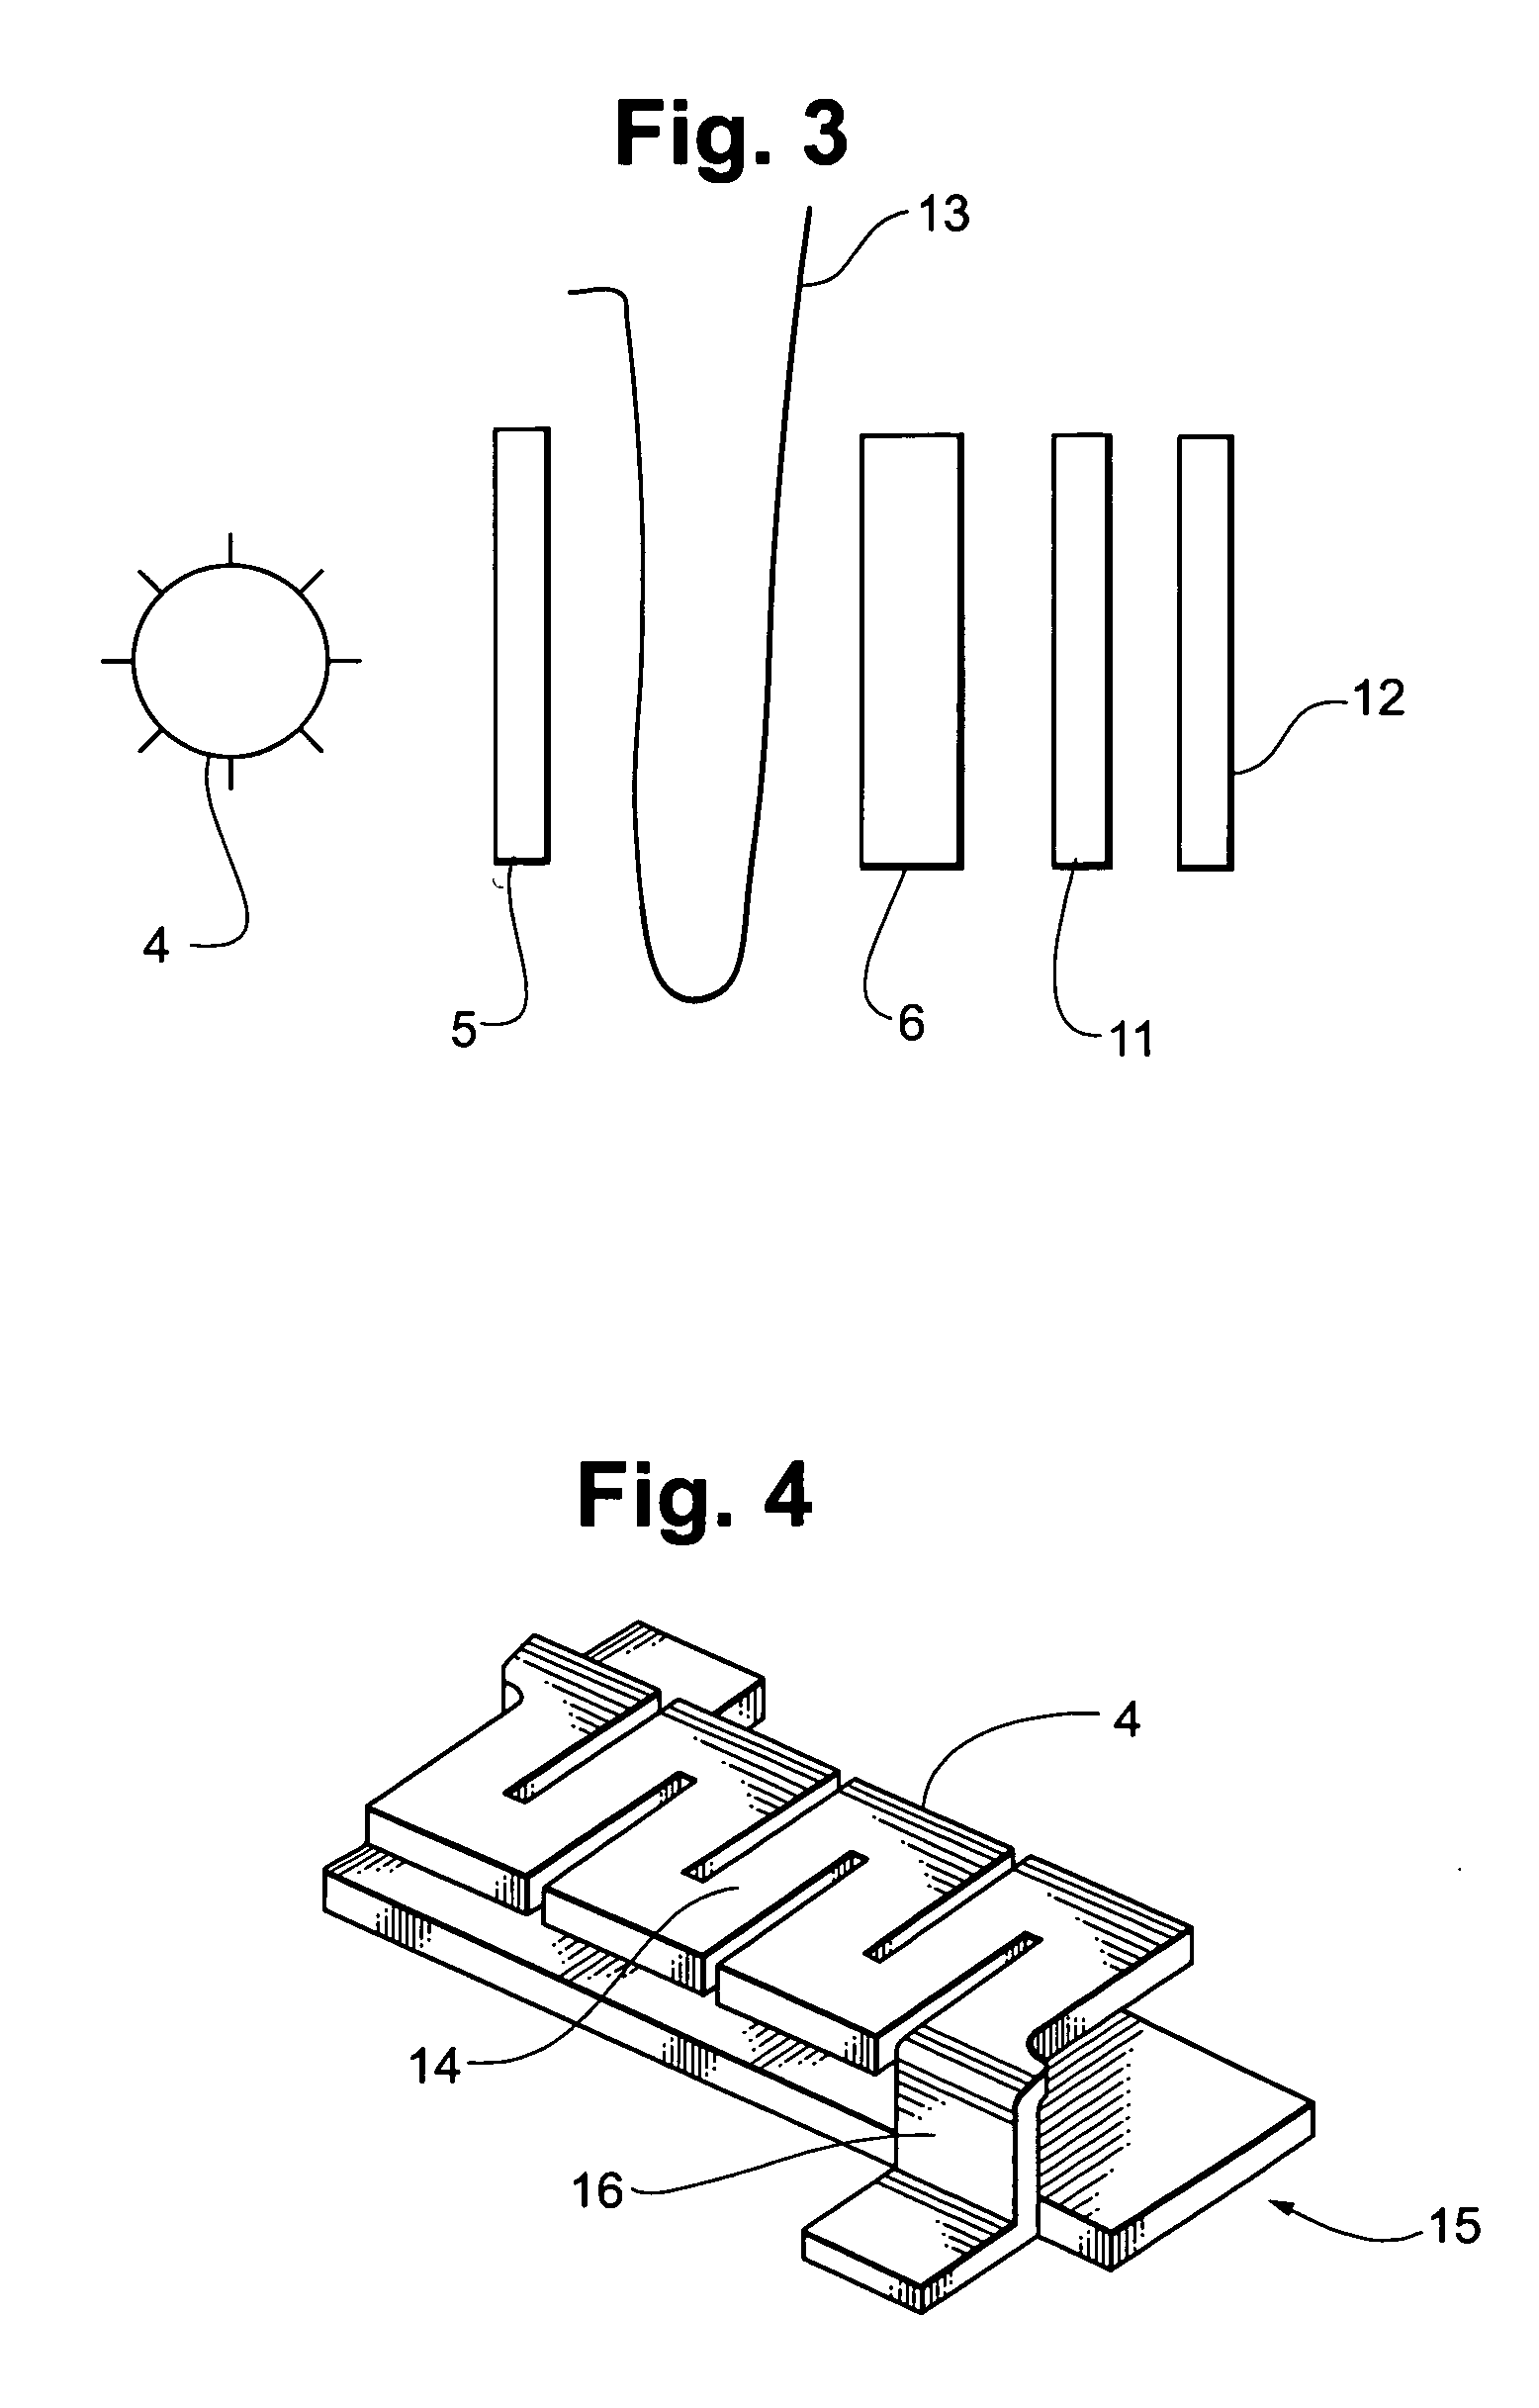 Non-invasive blood analyte measuring system and method utilizing optical absorption